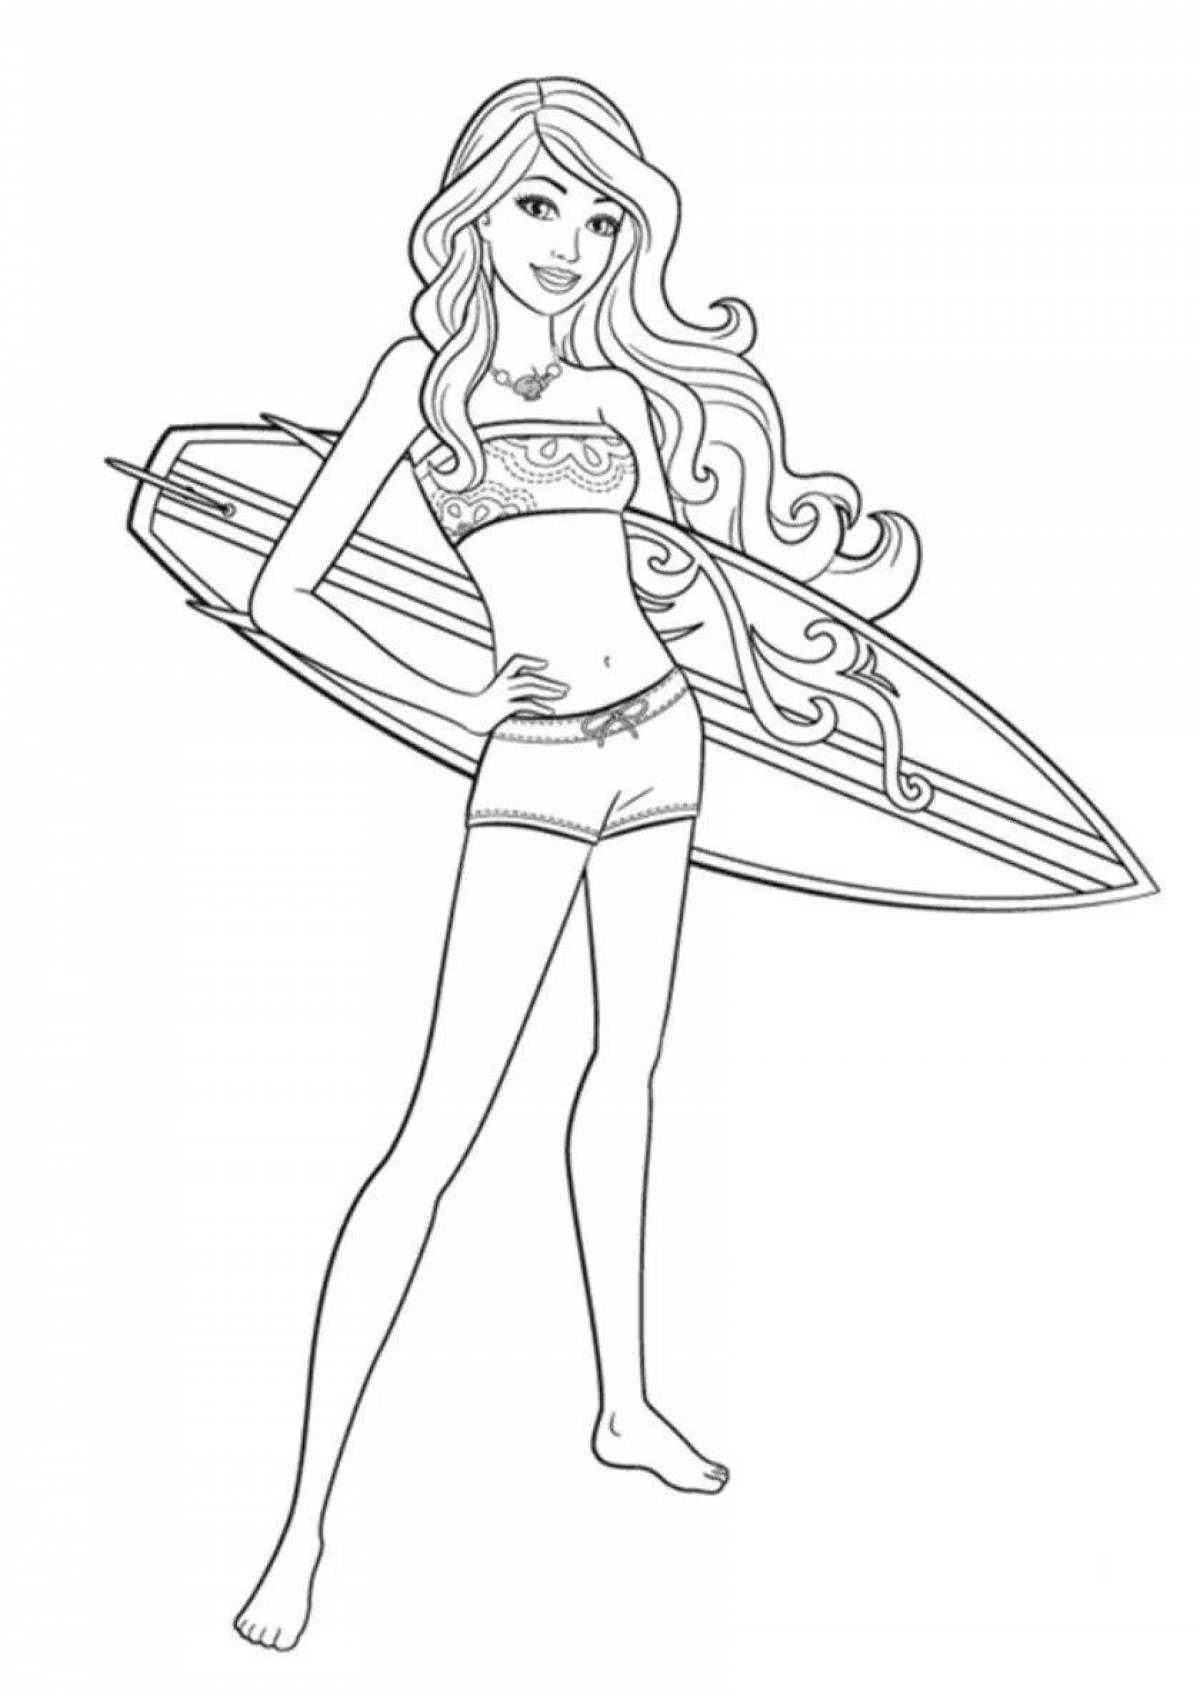 Coloring page mesmerizing barbie in a bathing suit